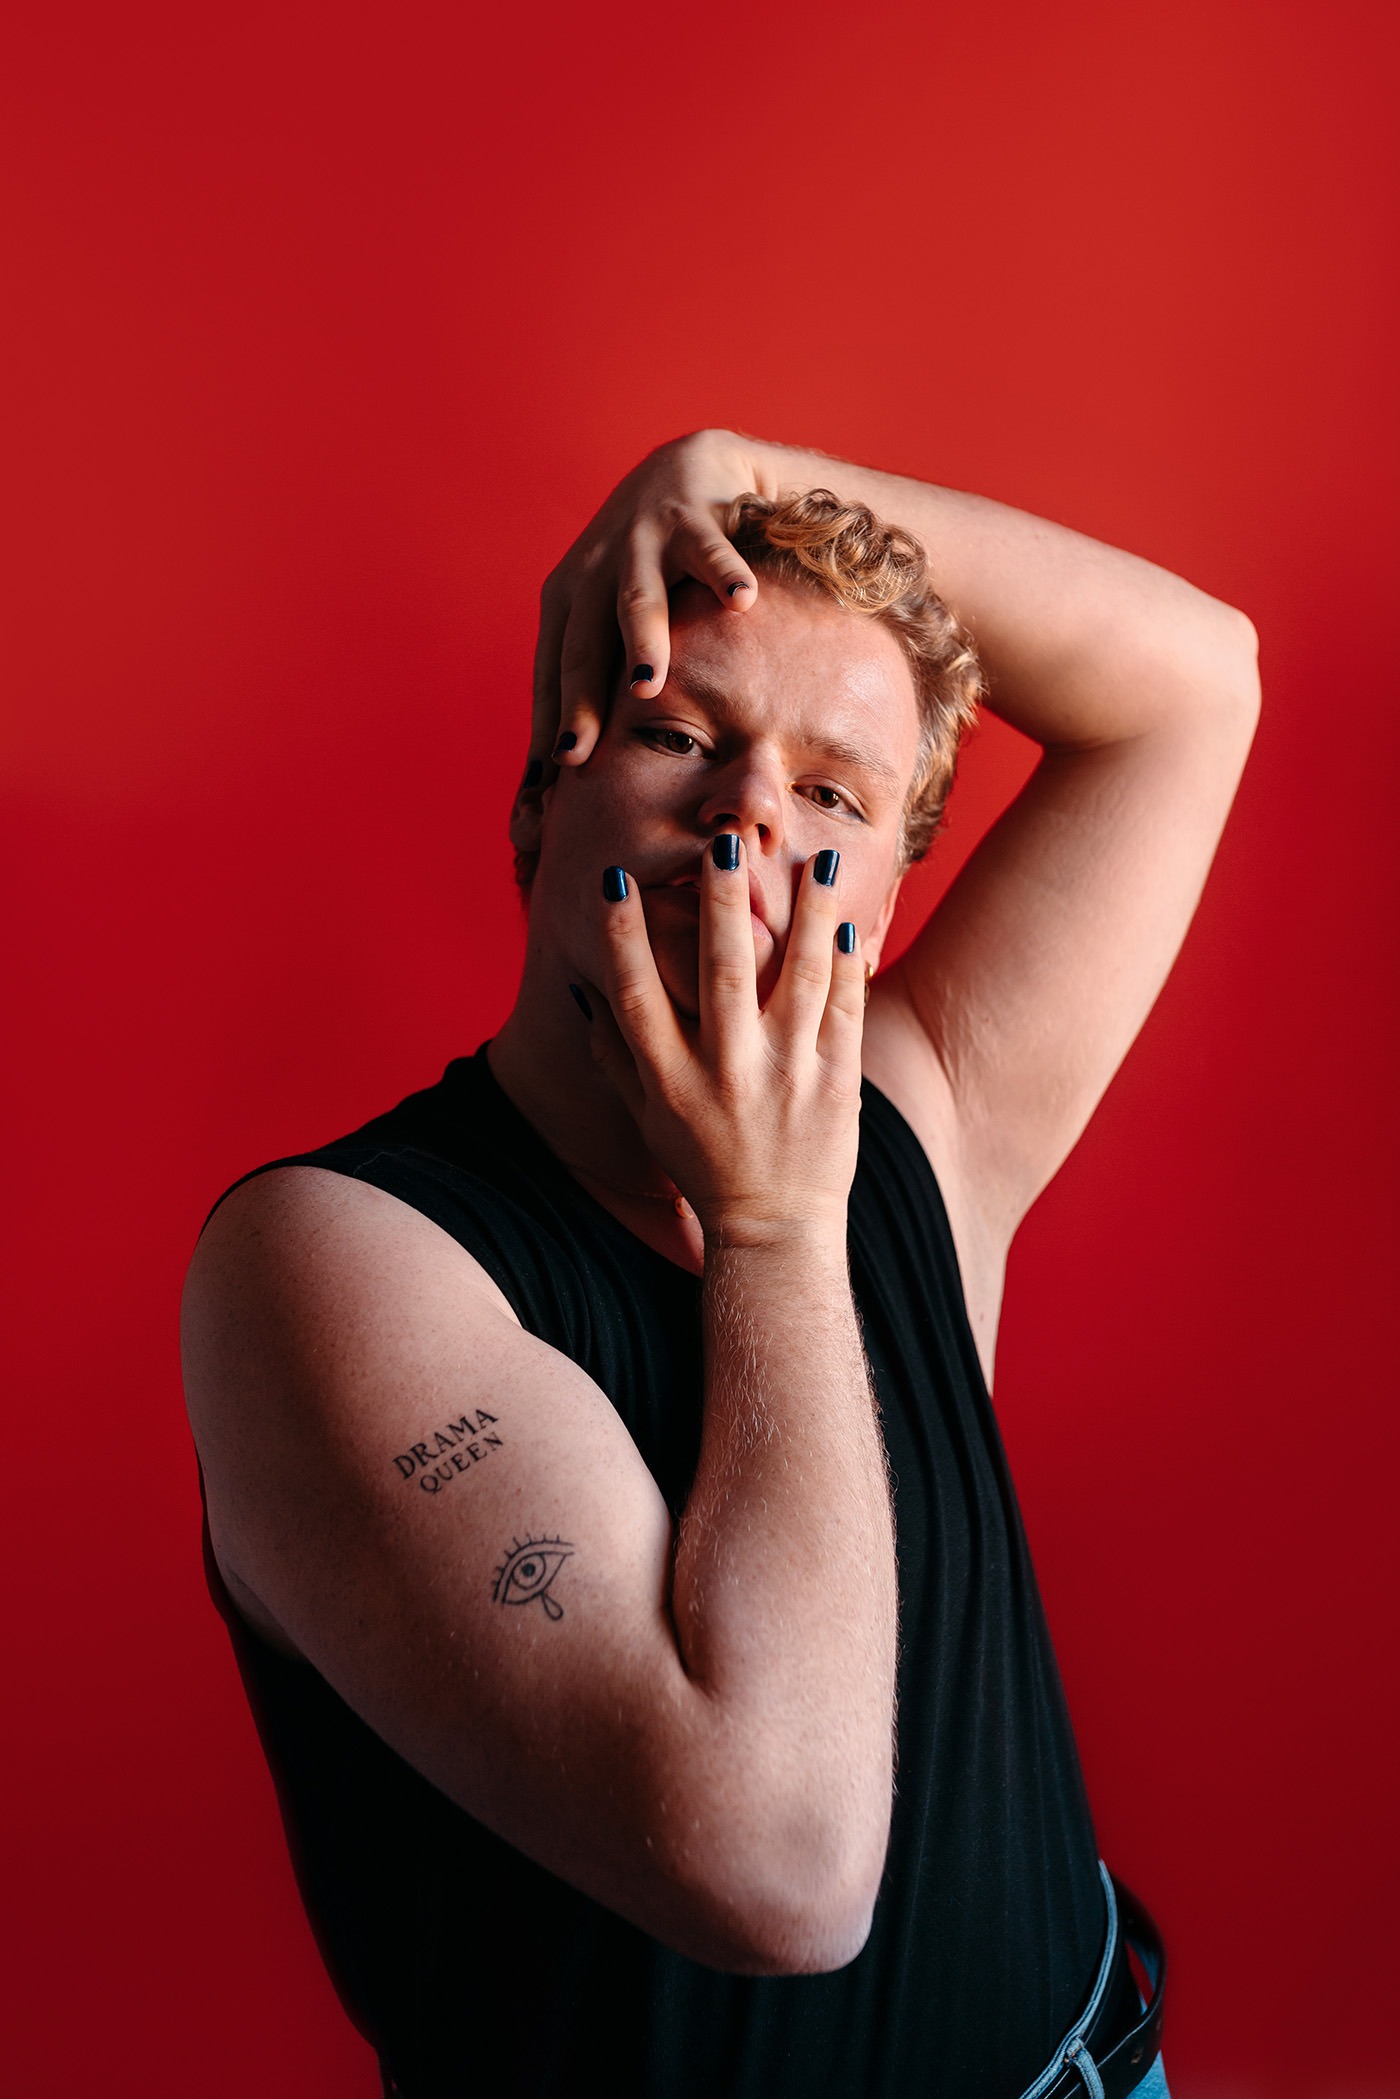 Studio portrait with red background of a young blonde gay man wearing a tank top and dark nails, looking at camera.